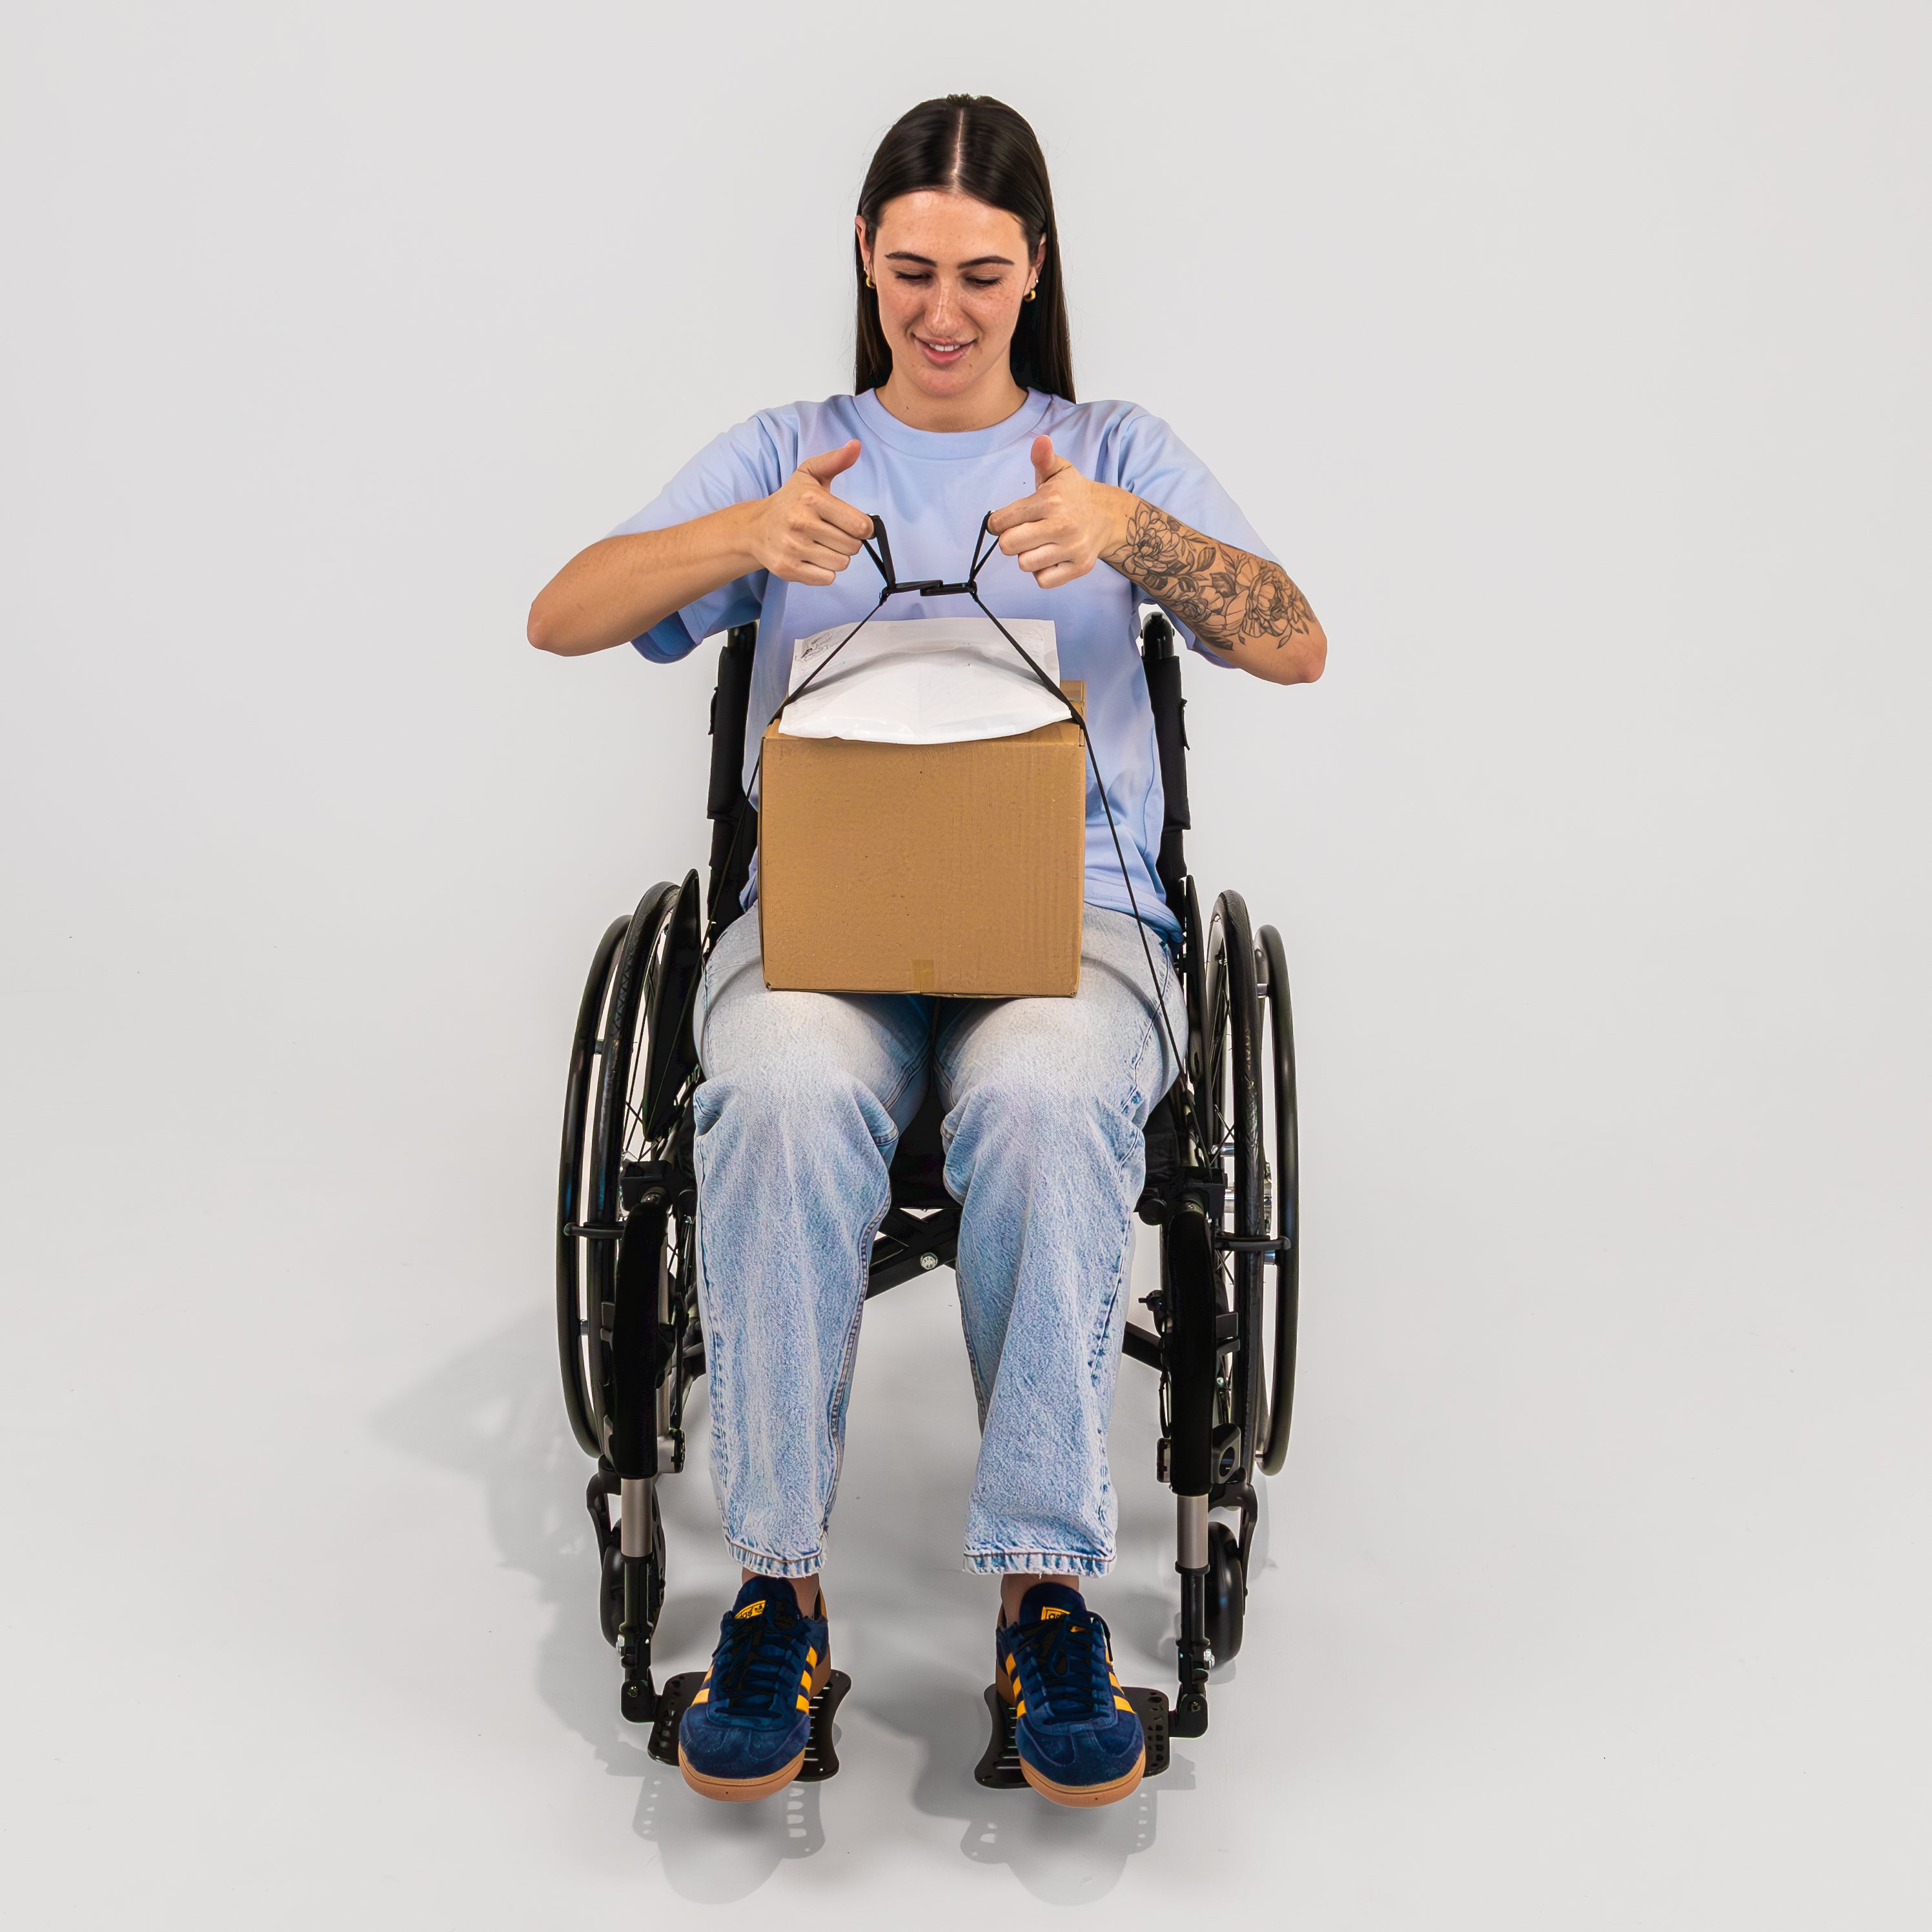 Smiling women seated in a wheelchair securing a box to her lap using LapStacker Flex.